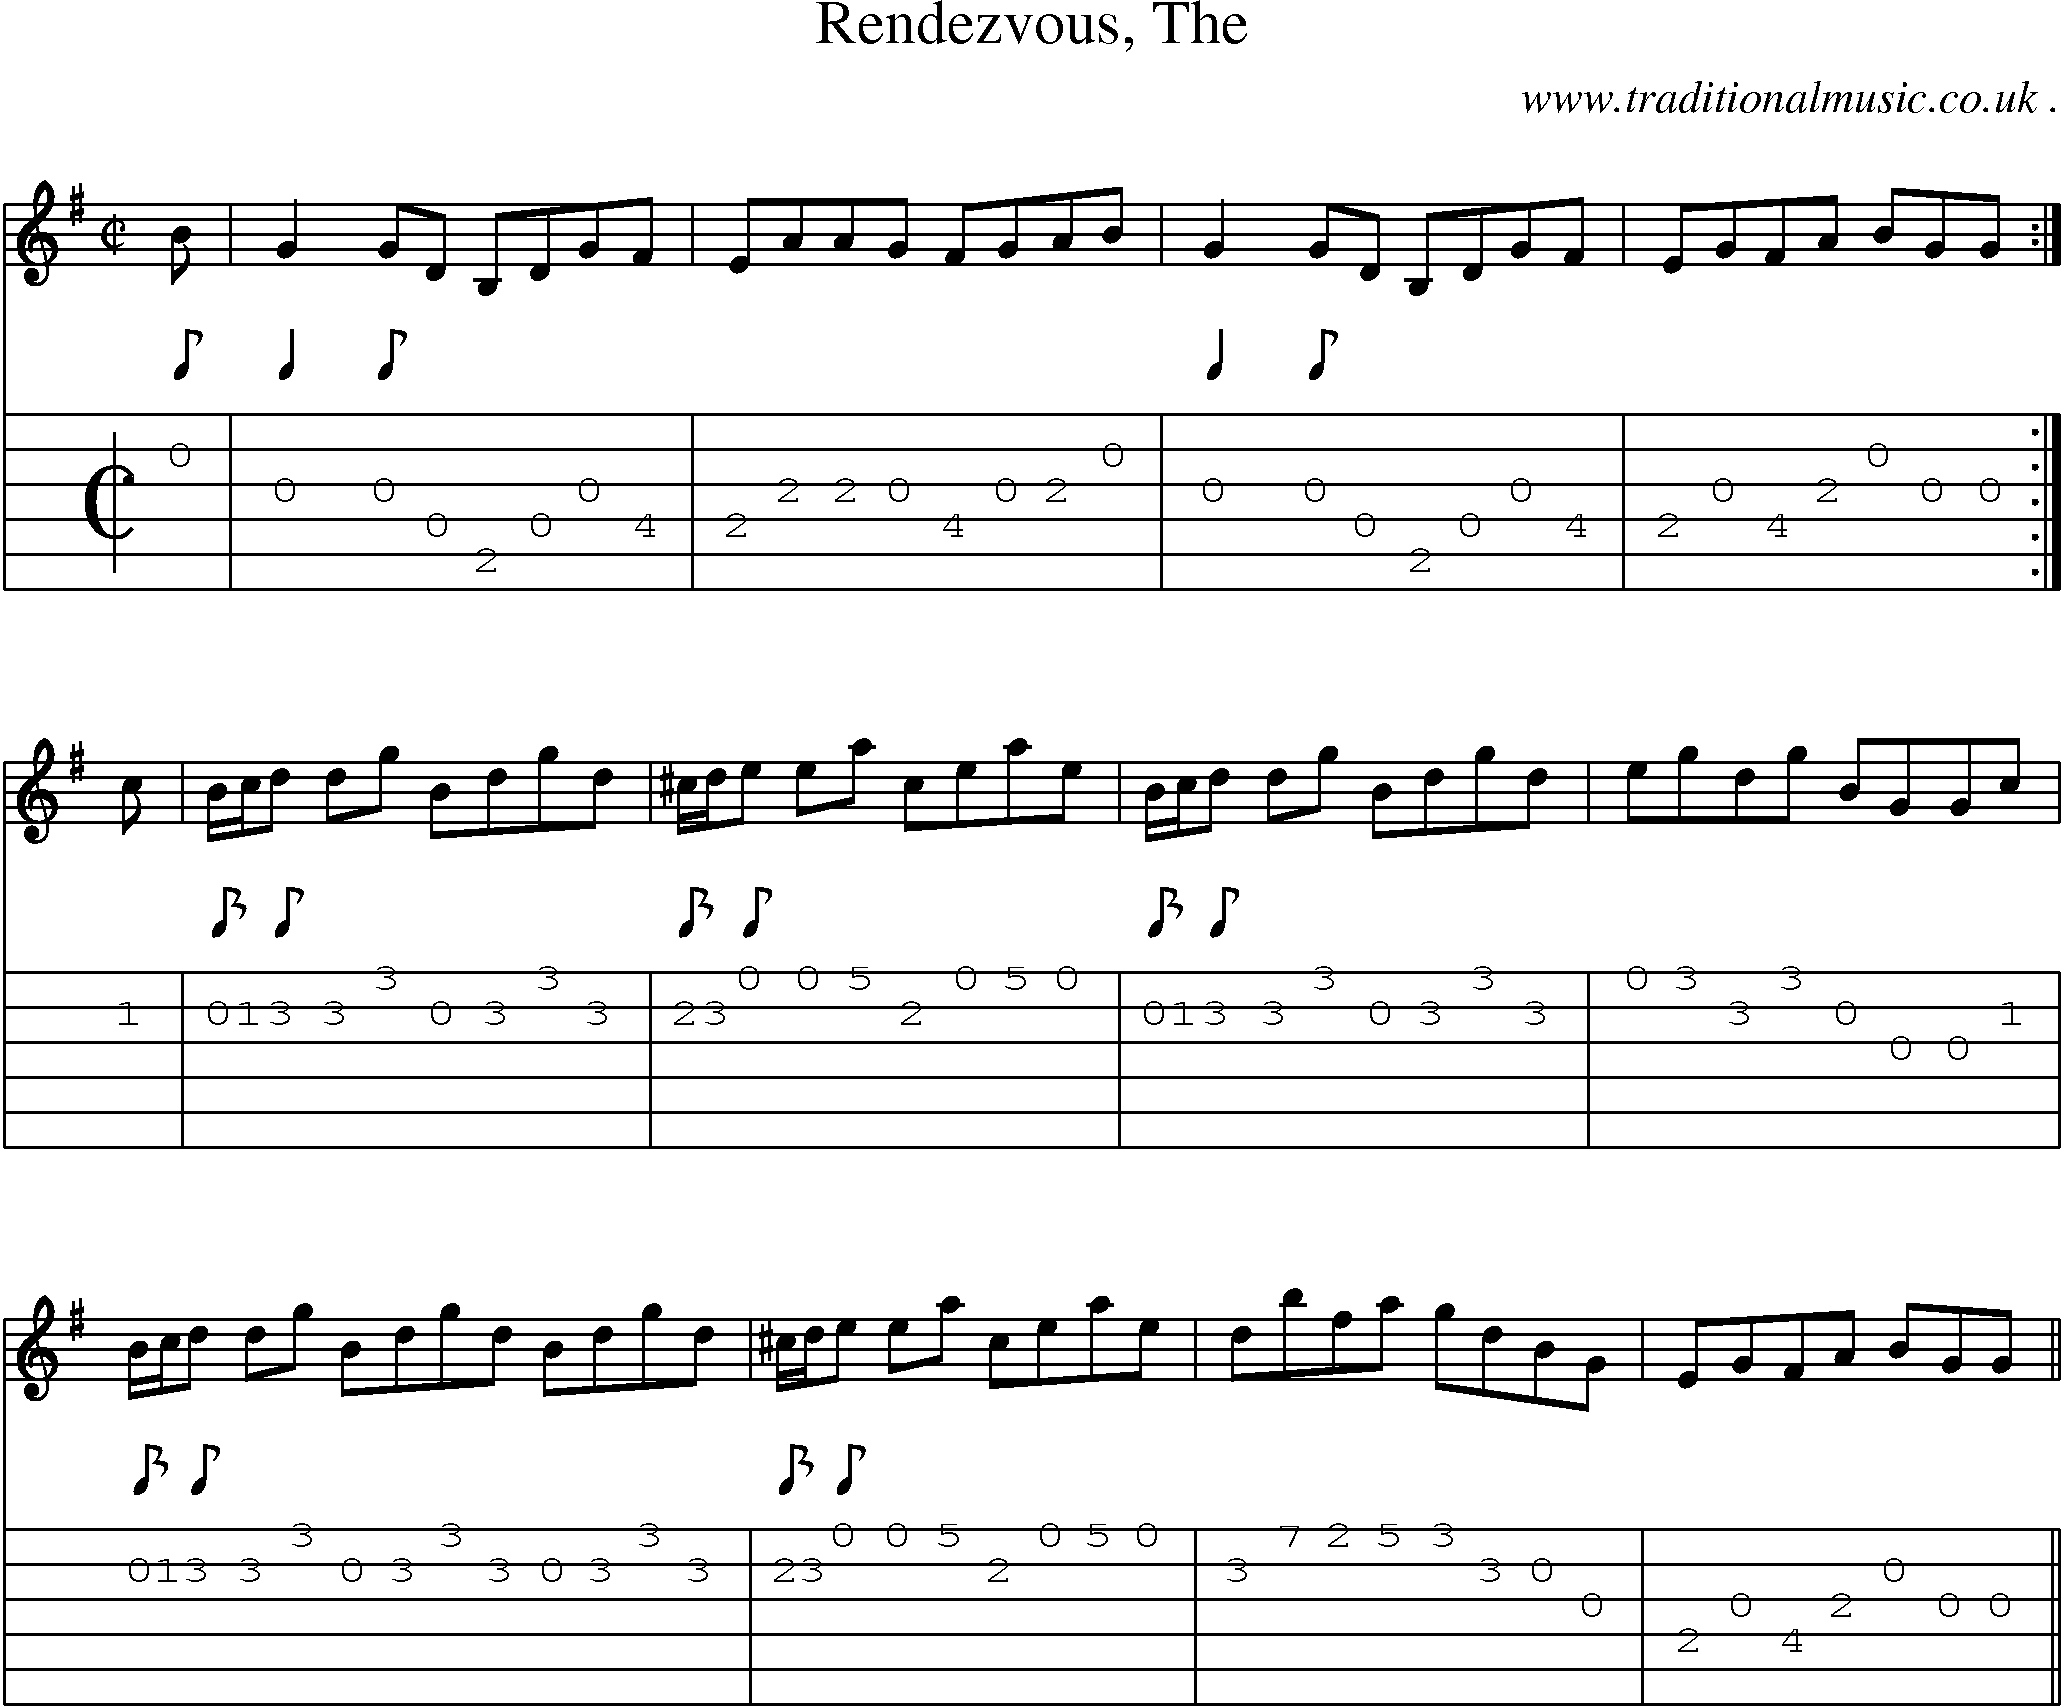 Sheet-music  score, Chords and Guitar Tabs for Rendezvous The